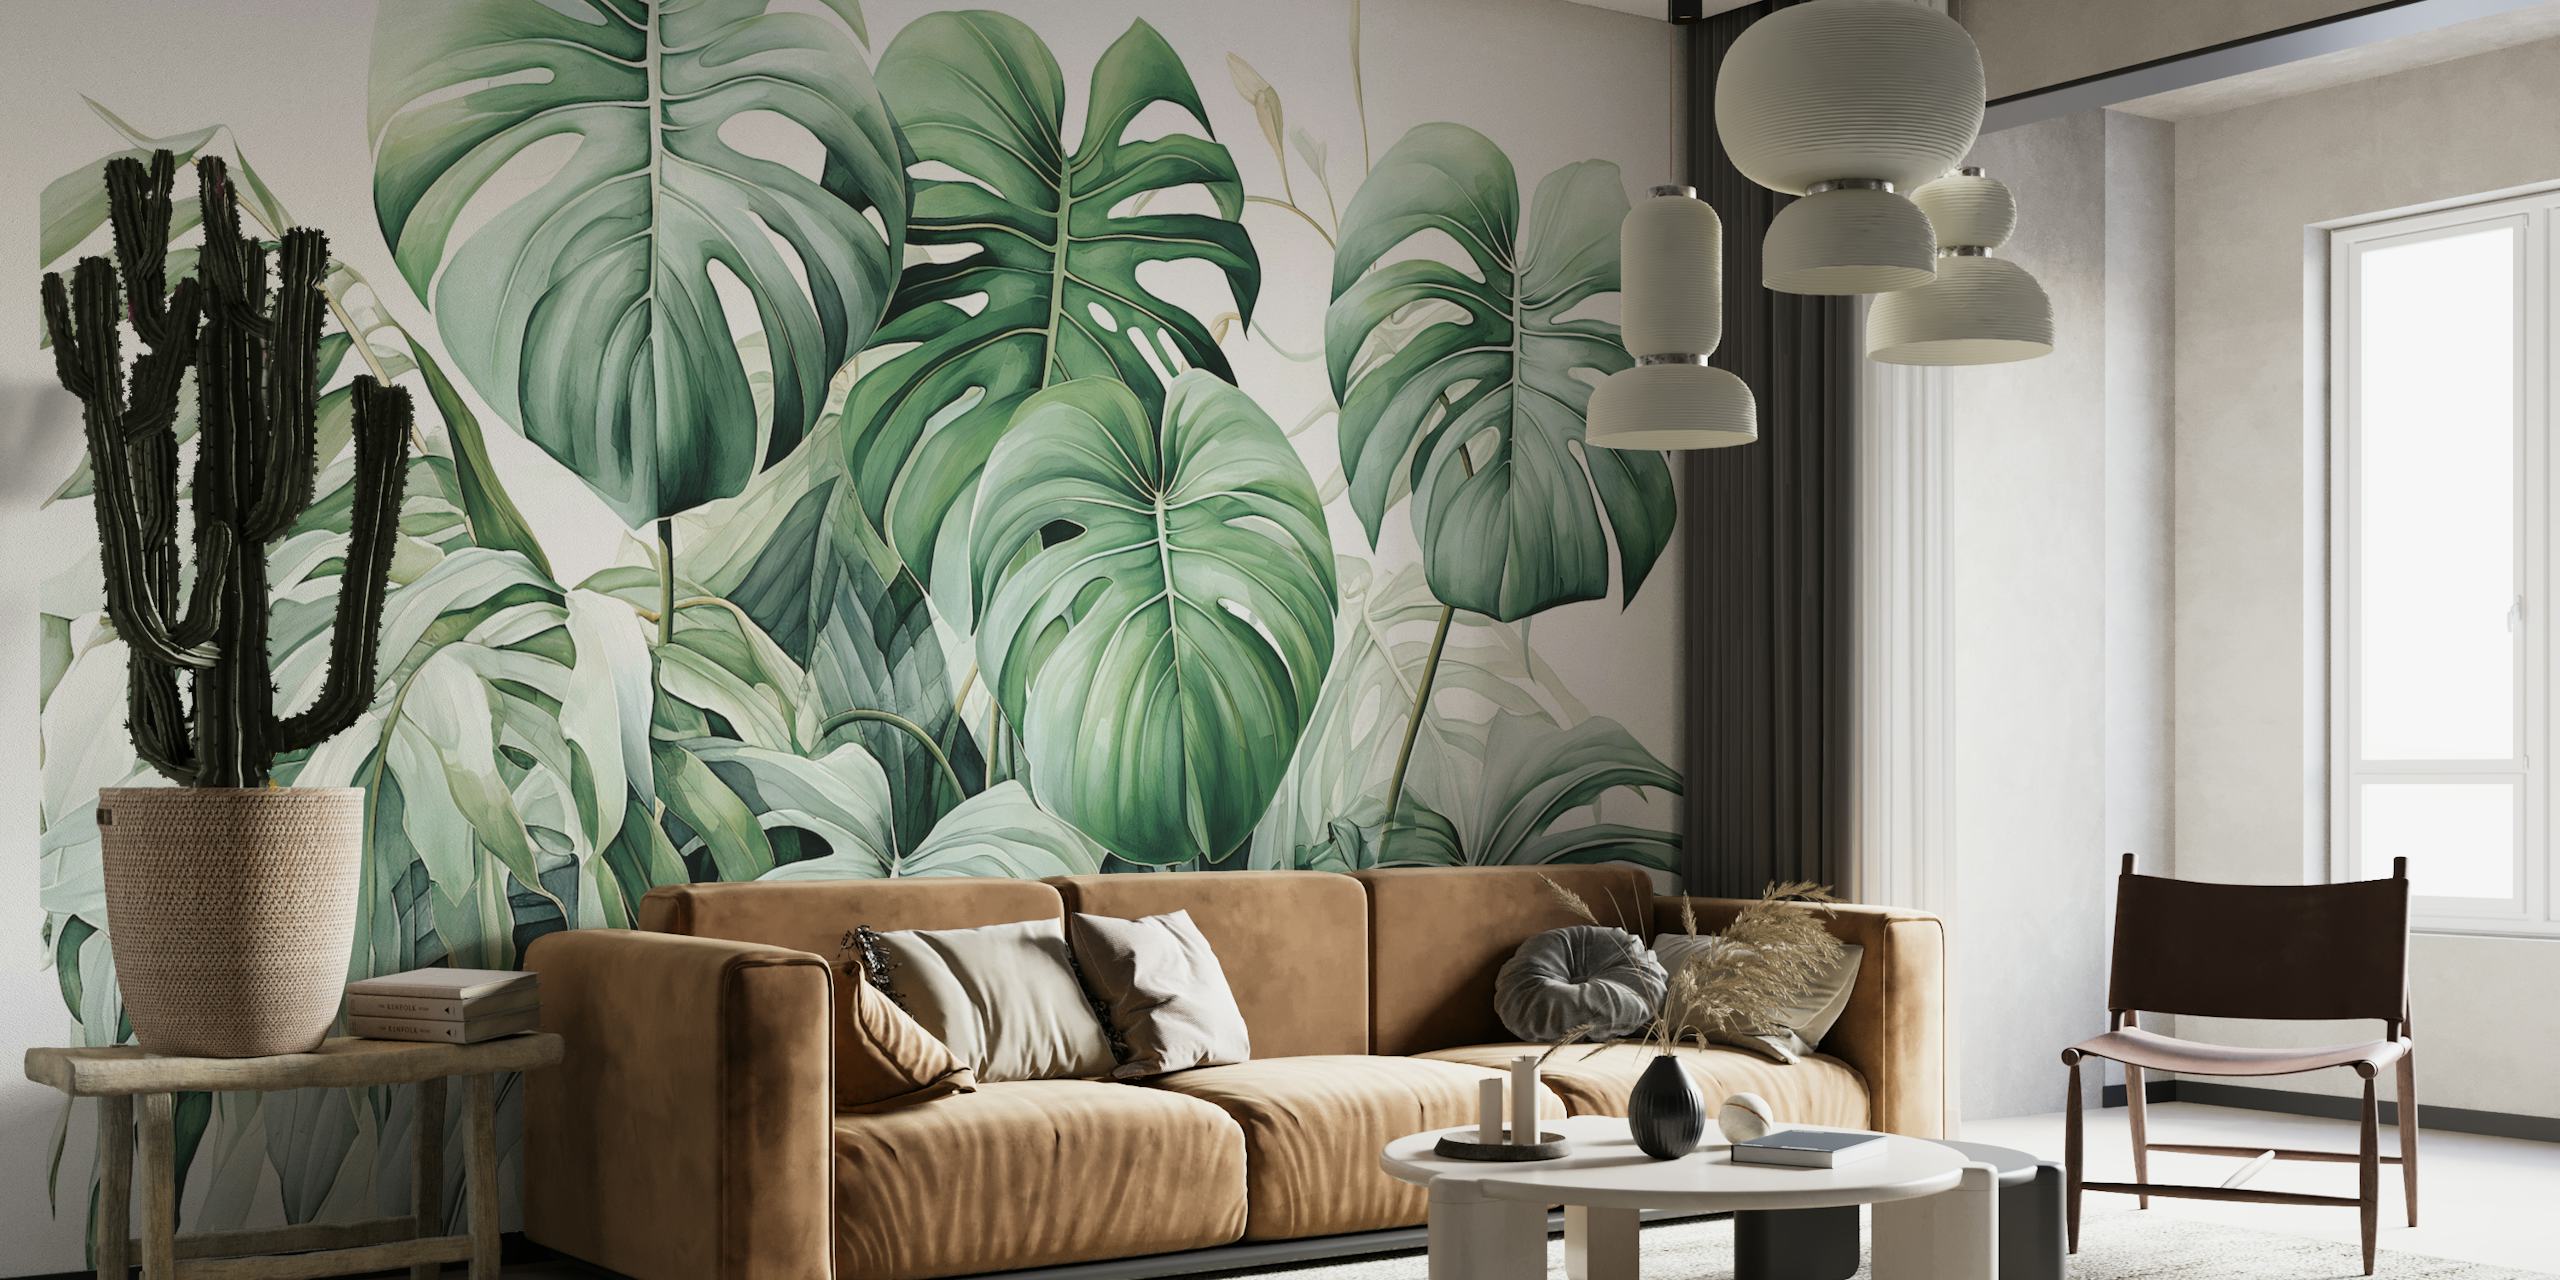 Oversized green foliage wall mural in a variety of shades creating a dense leafy pattern.